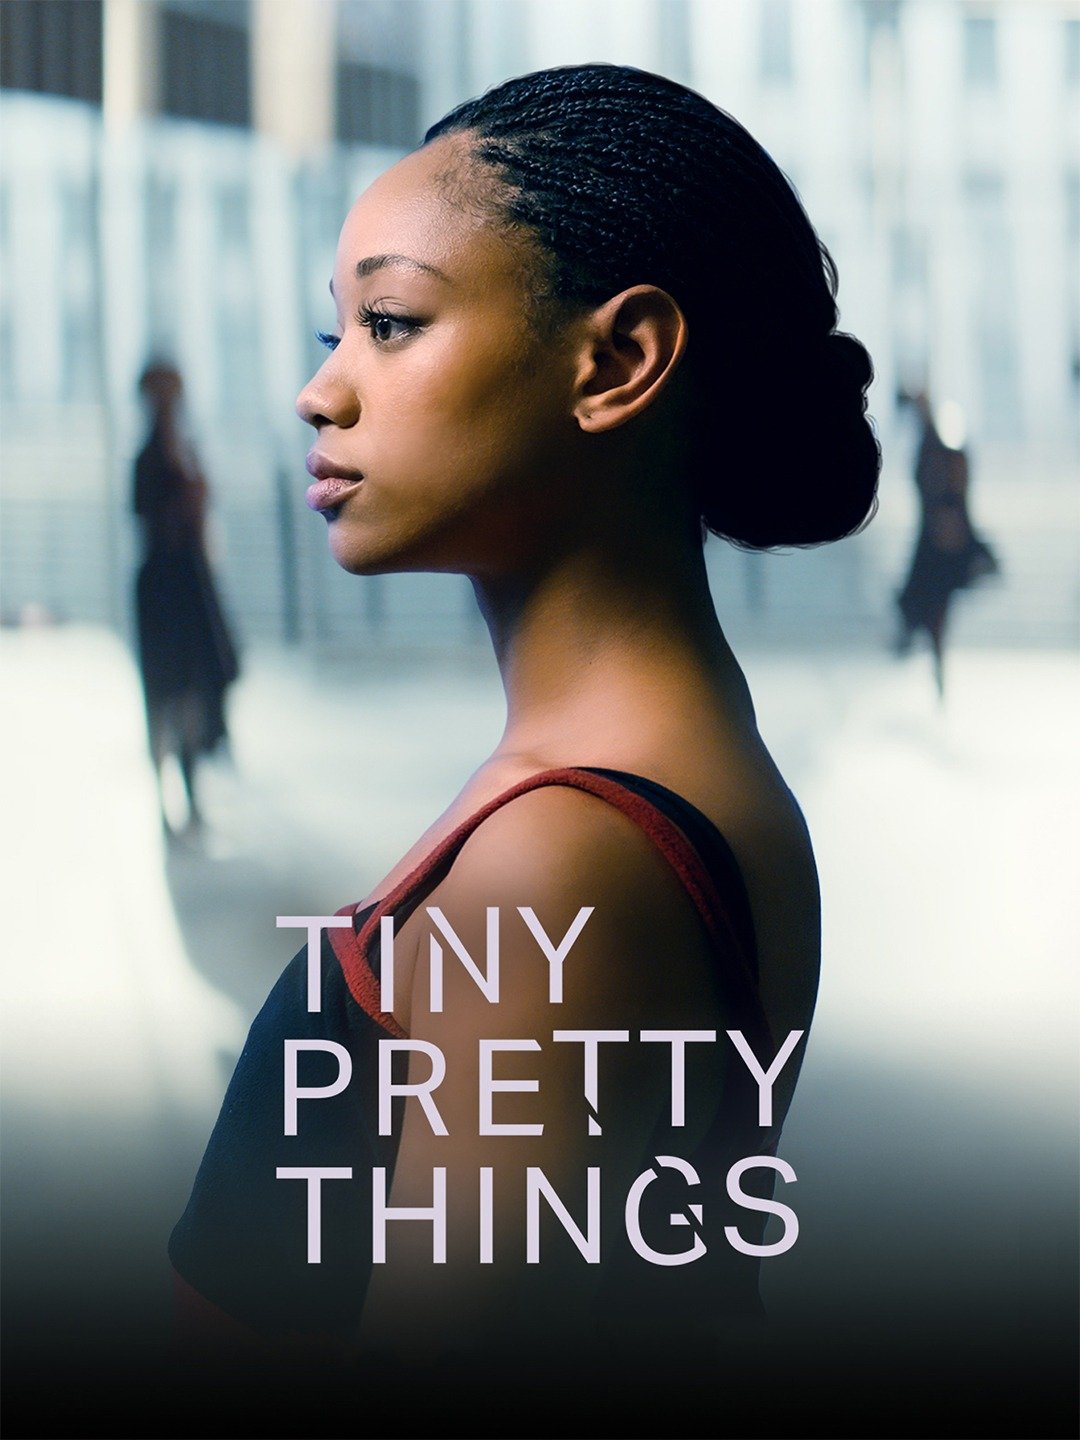 Tiny Pretty Things Rotten Tomatoes